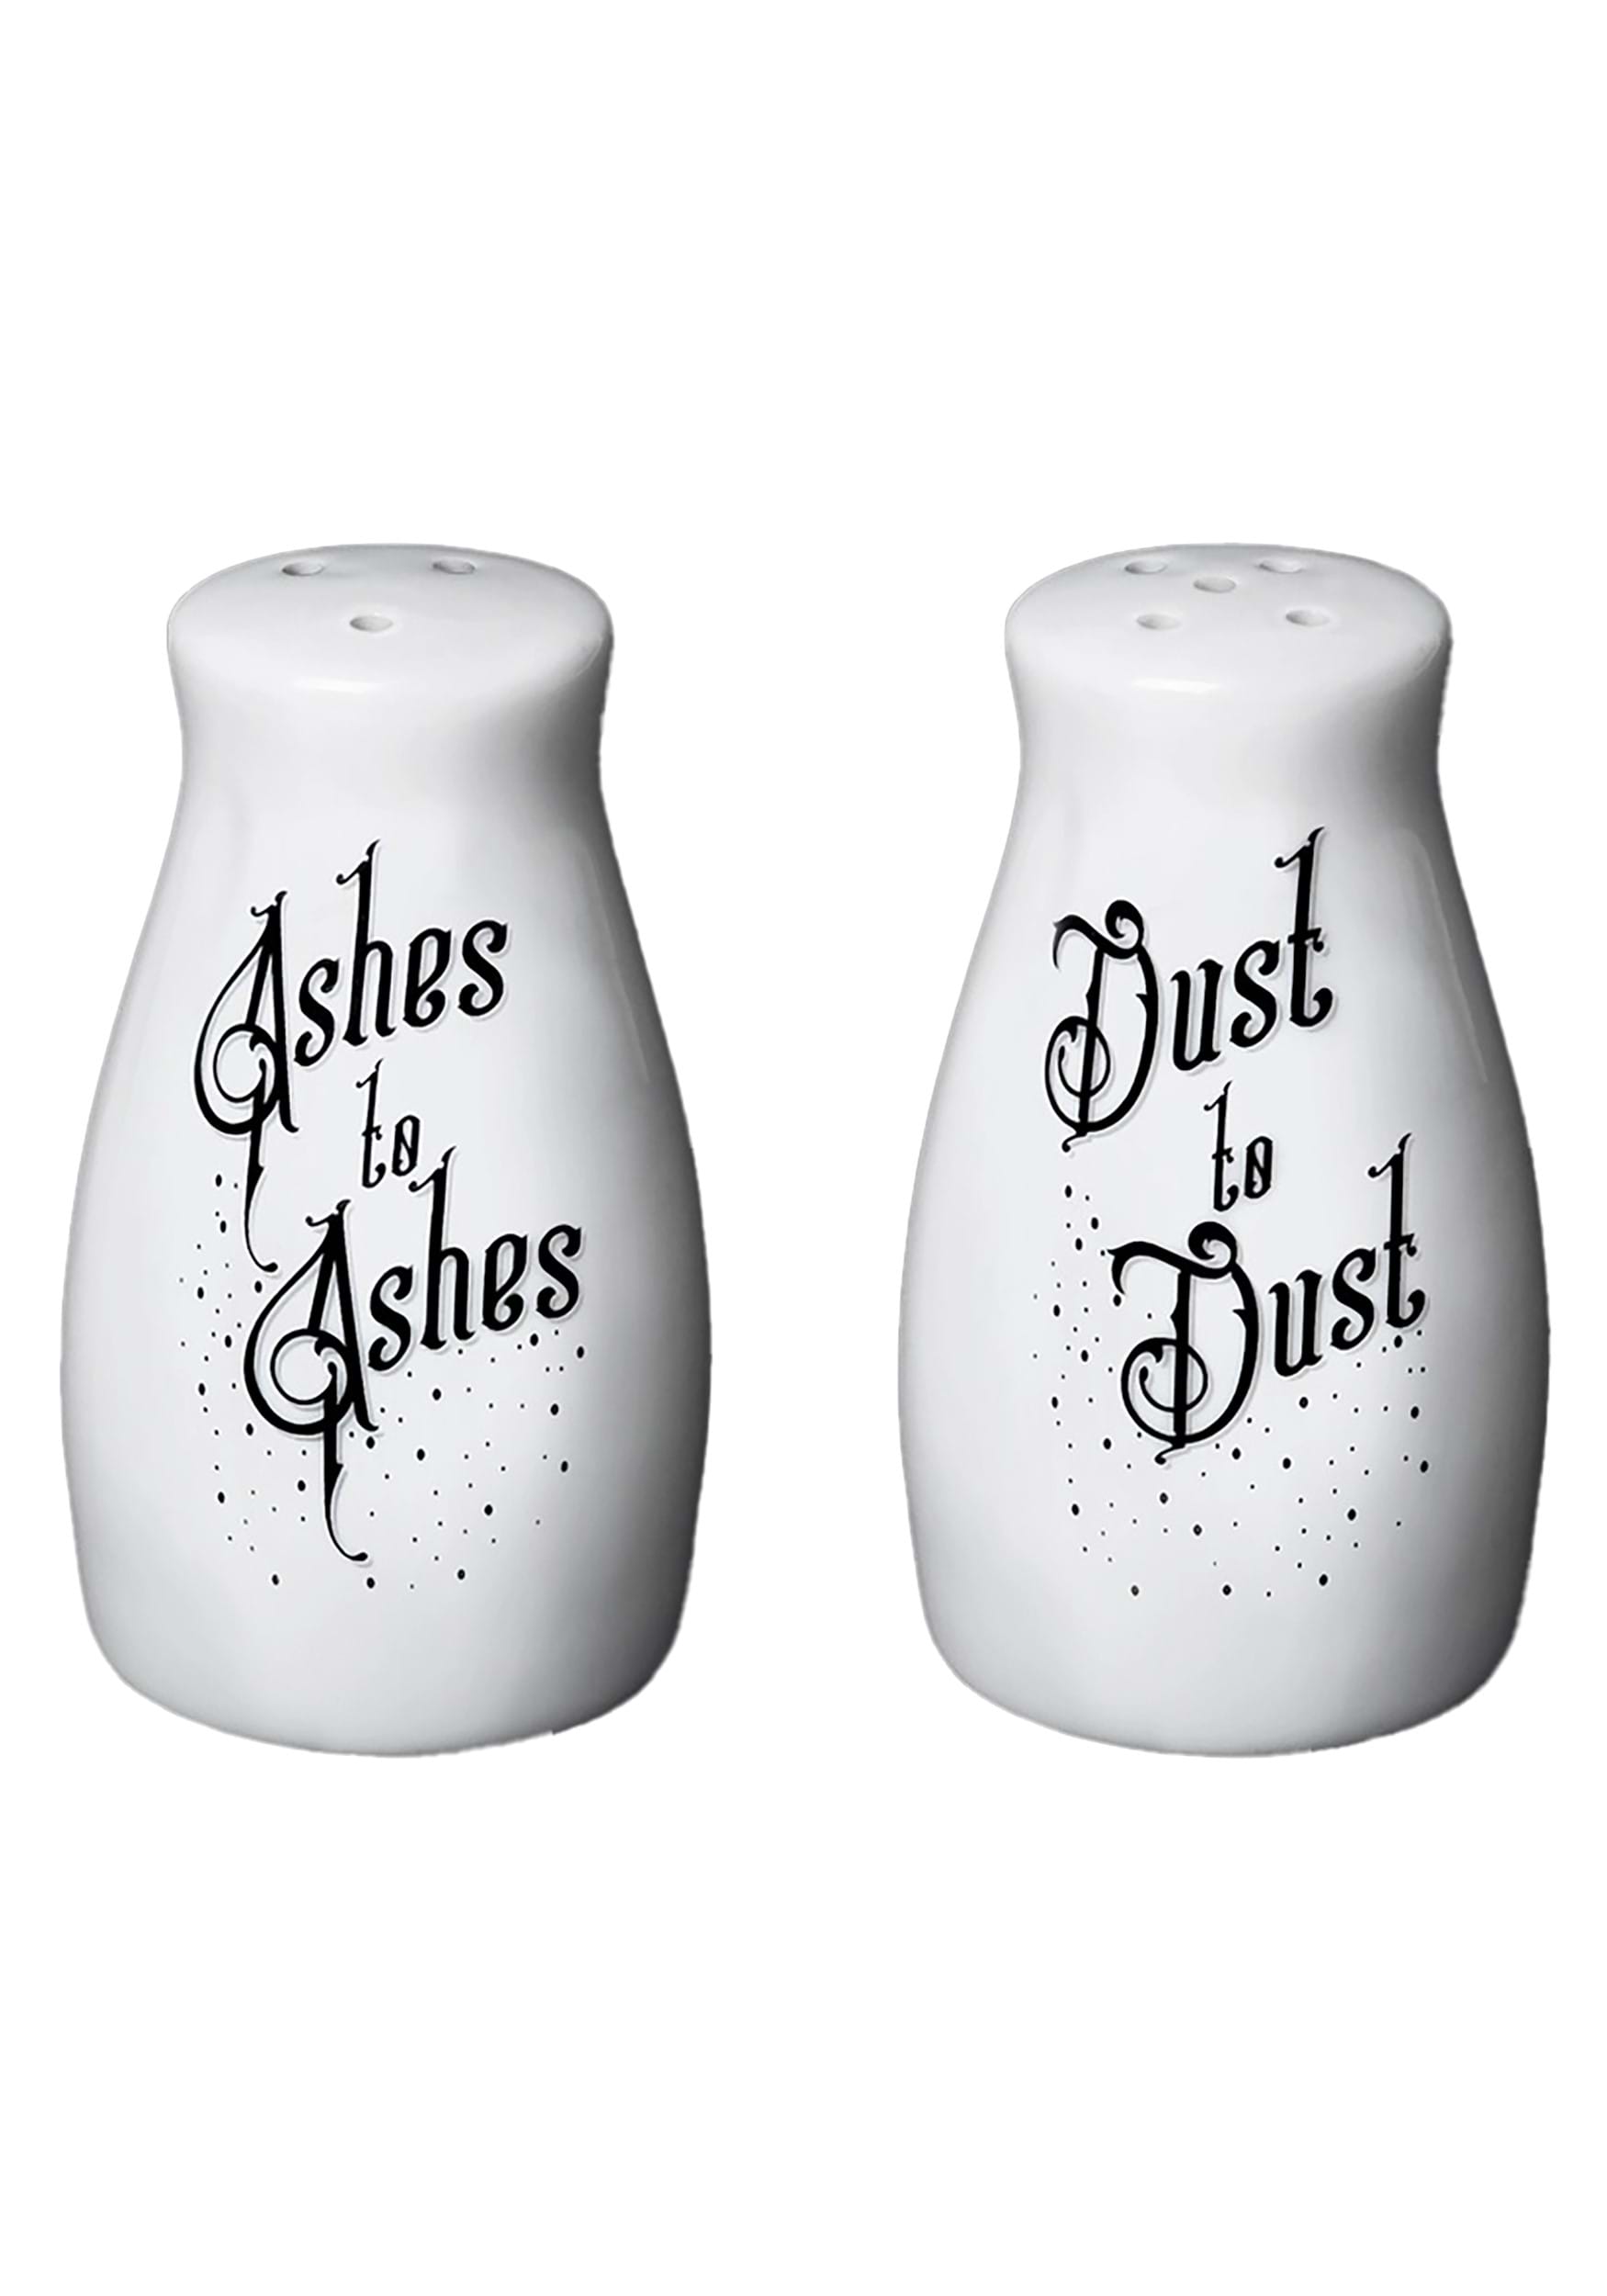 Ashes to Ashes / Dust to Dust Salt and Pepper Shakers